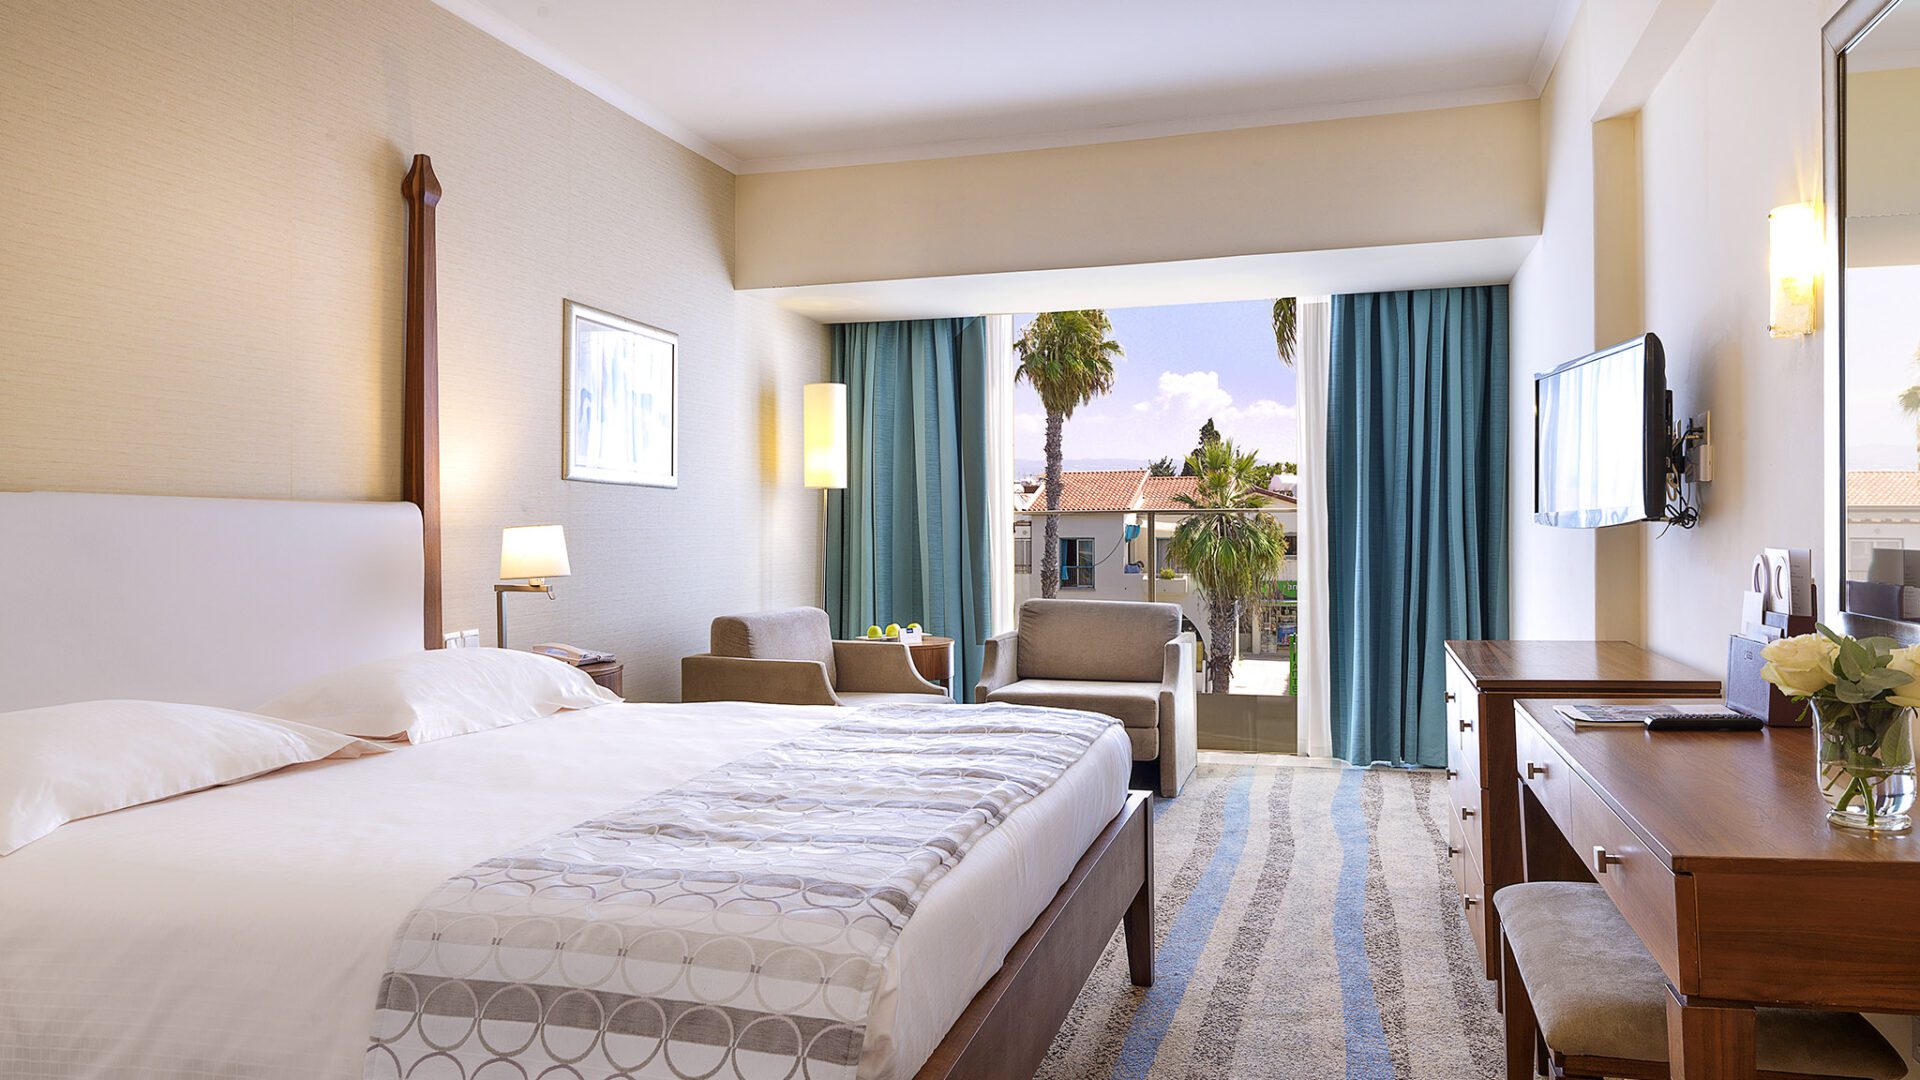 Luxury Room at Alexander the Great Beach Hotel in Cyprus Paphos